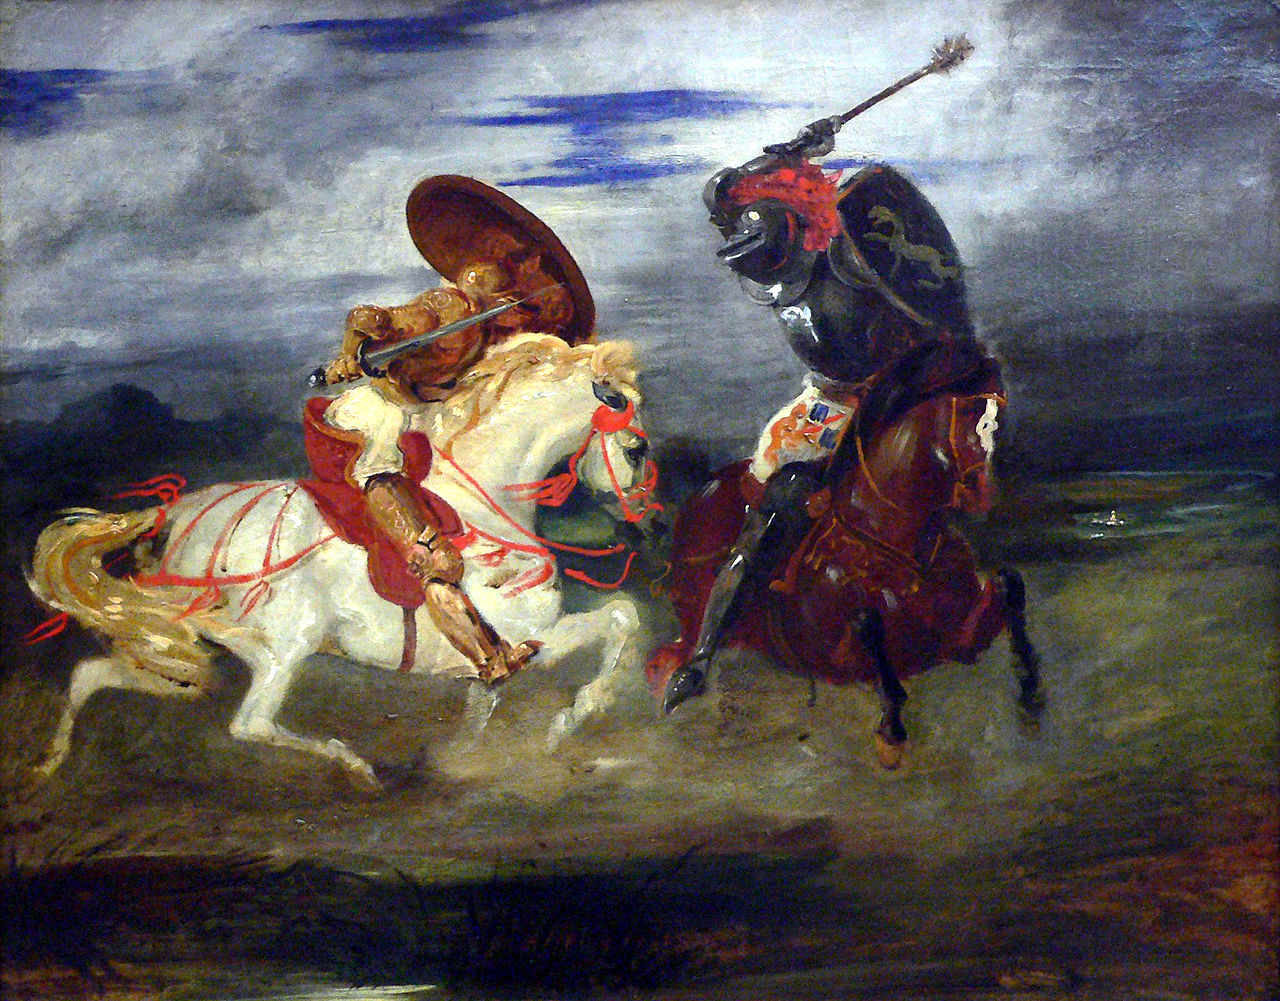 Fight of knights in the counry side by Eugène Delacroix, c.1824